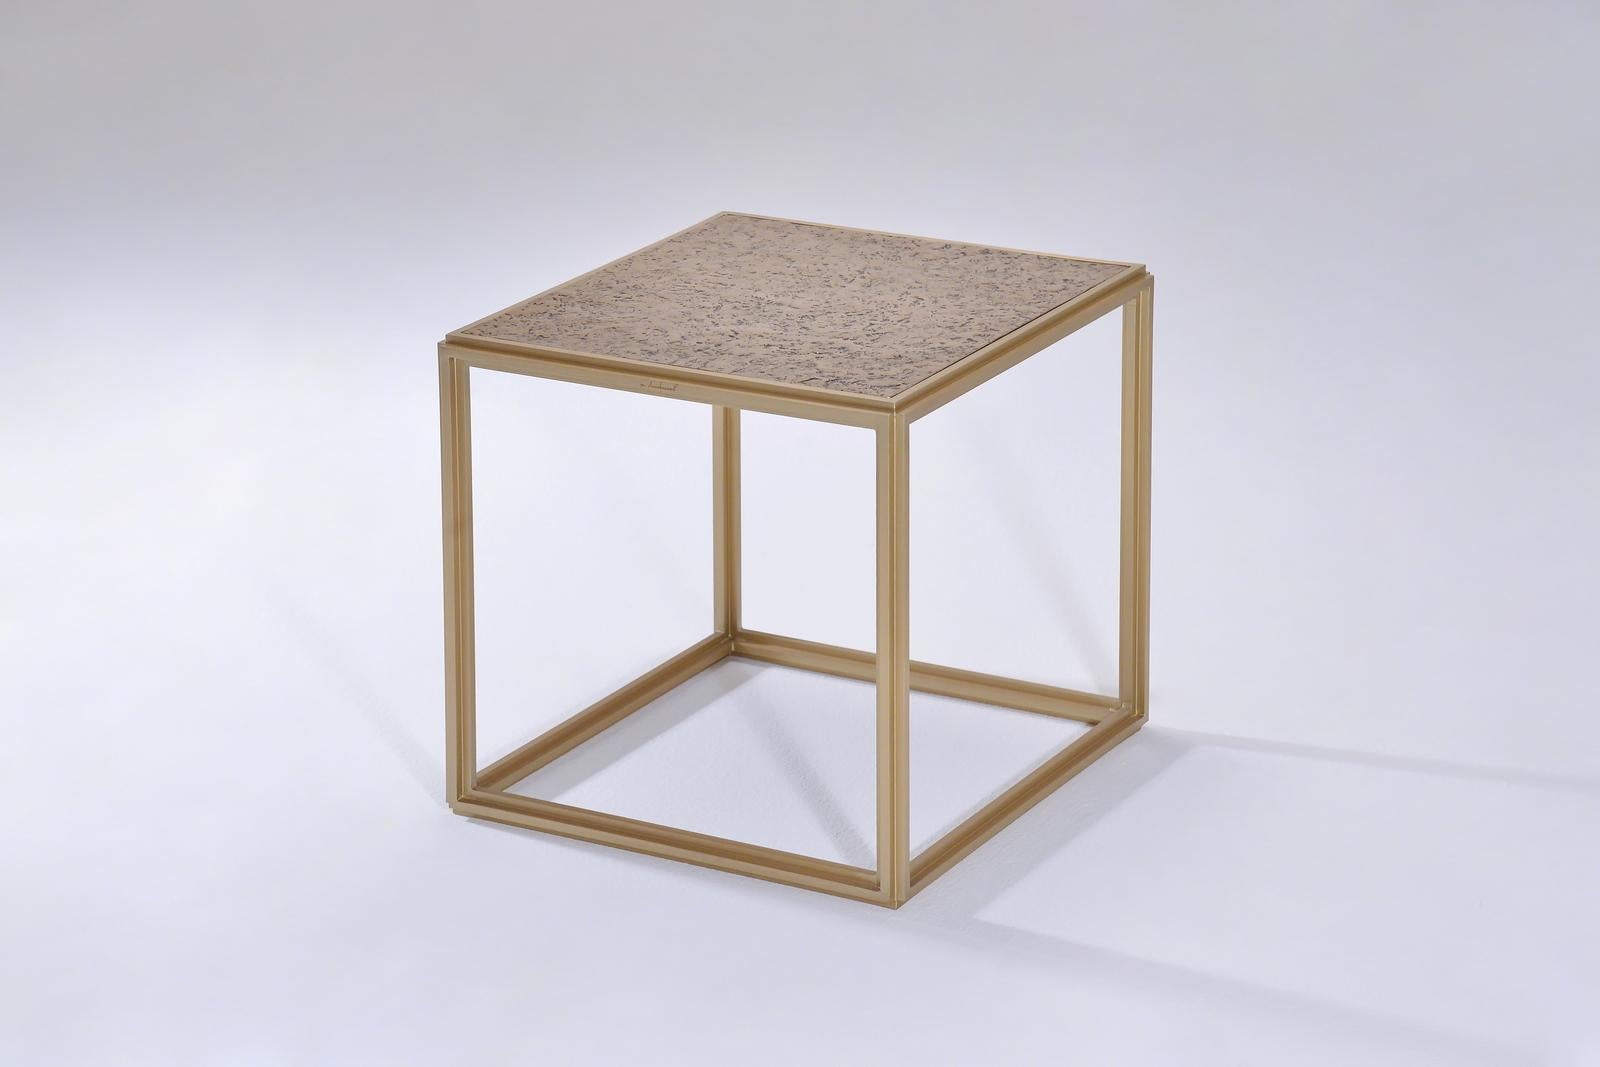 Inspired by the modernists we created this cubist table in extruded brushed brass and hand-welded profiles and topped it off with a sand-cast top in Textured bronze to add more contrast. This table was created for a designer in San Francisco as part